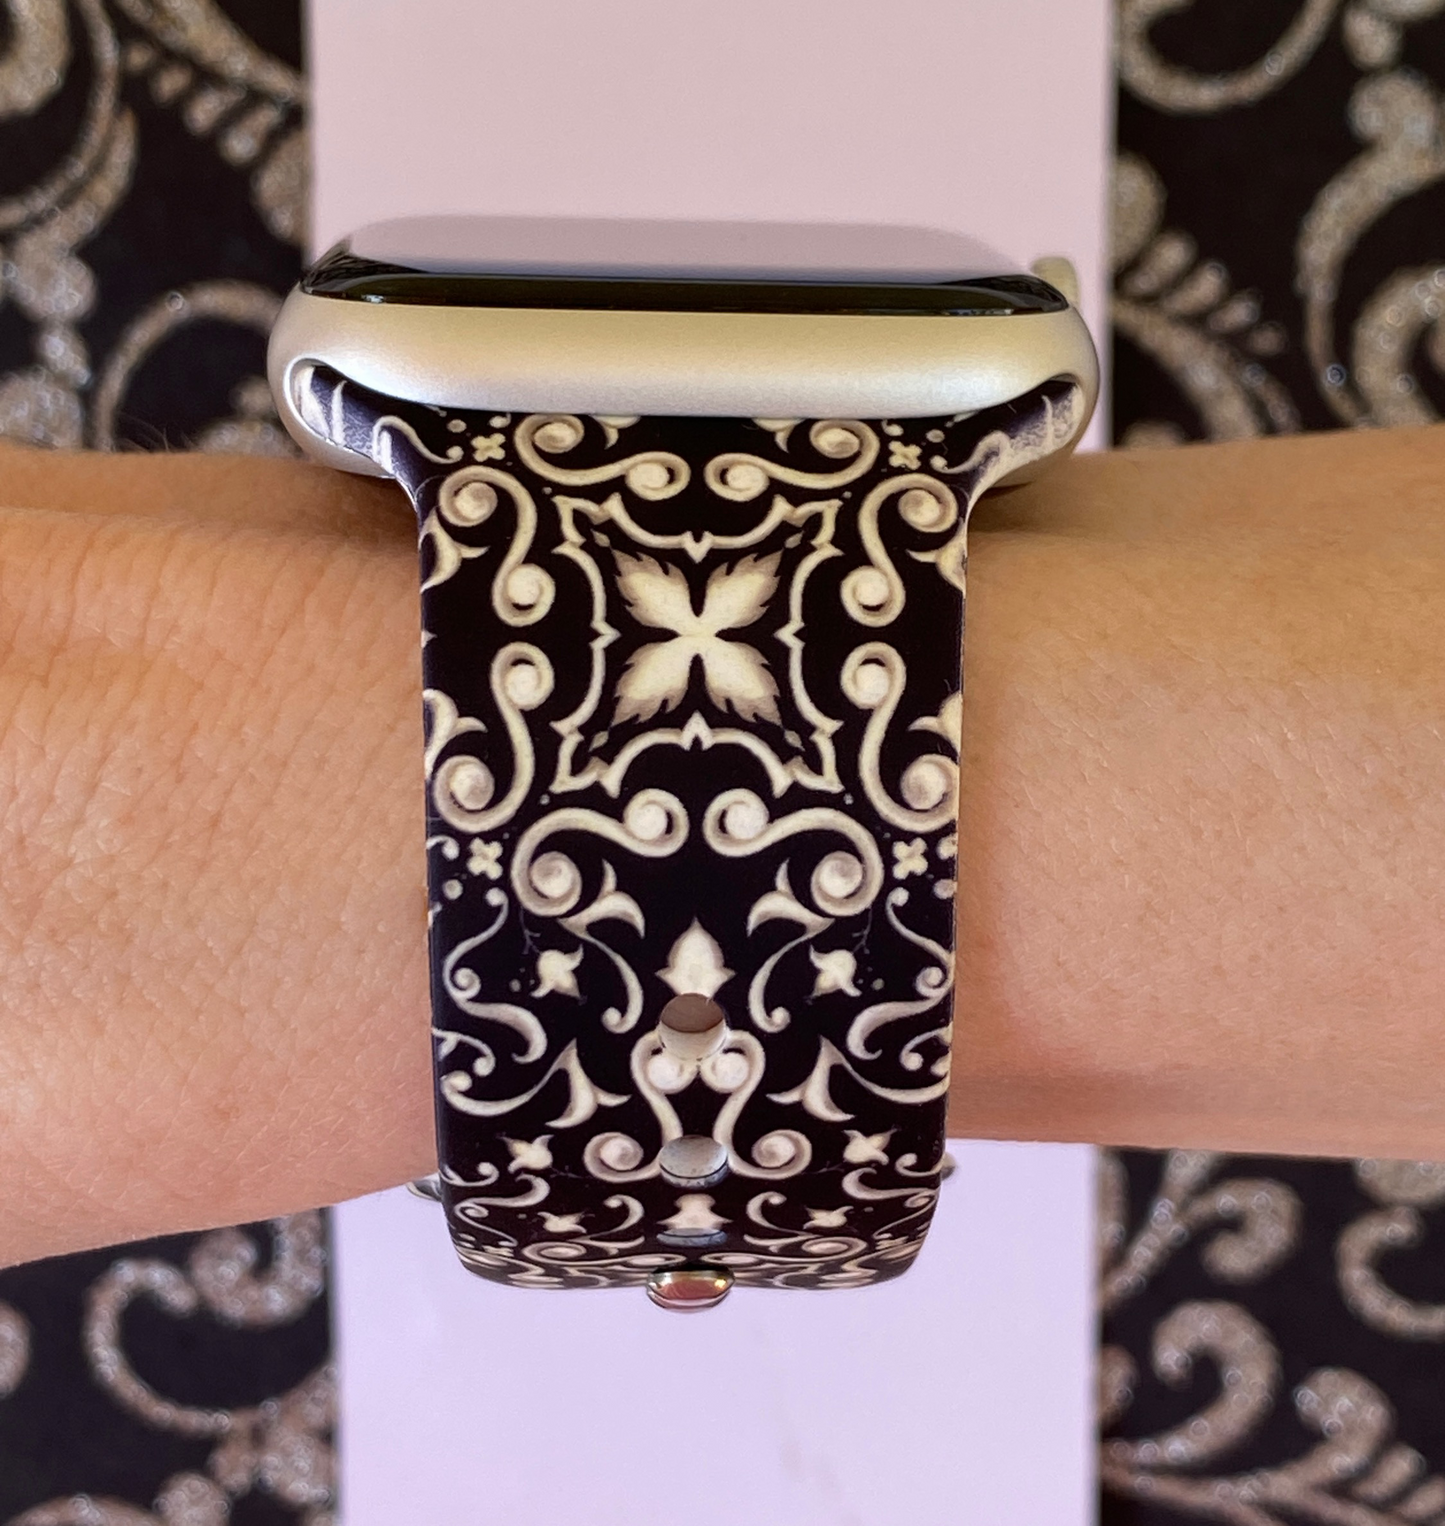 Fancy Night Out Apple Watch Band